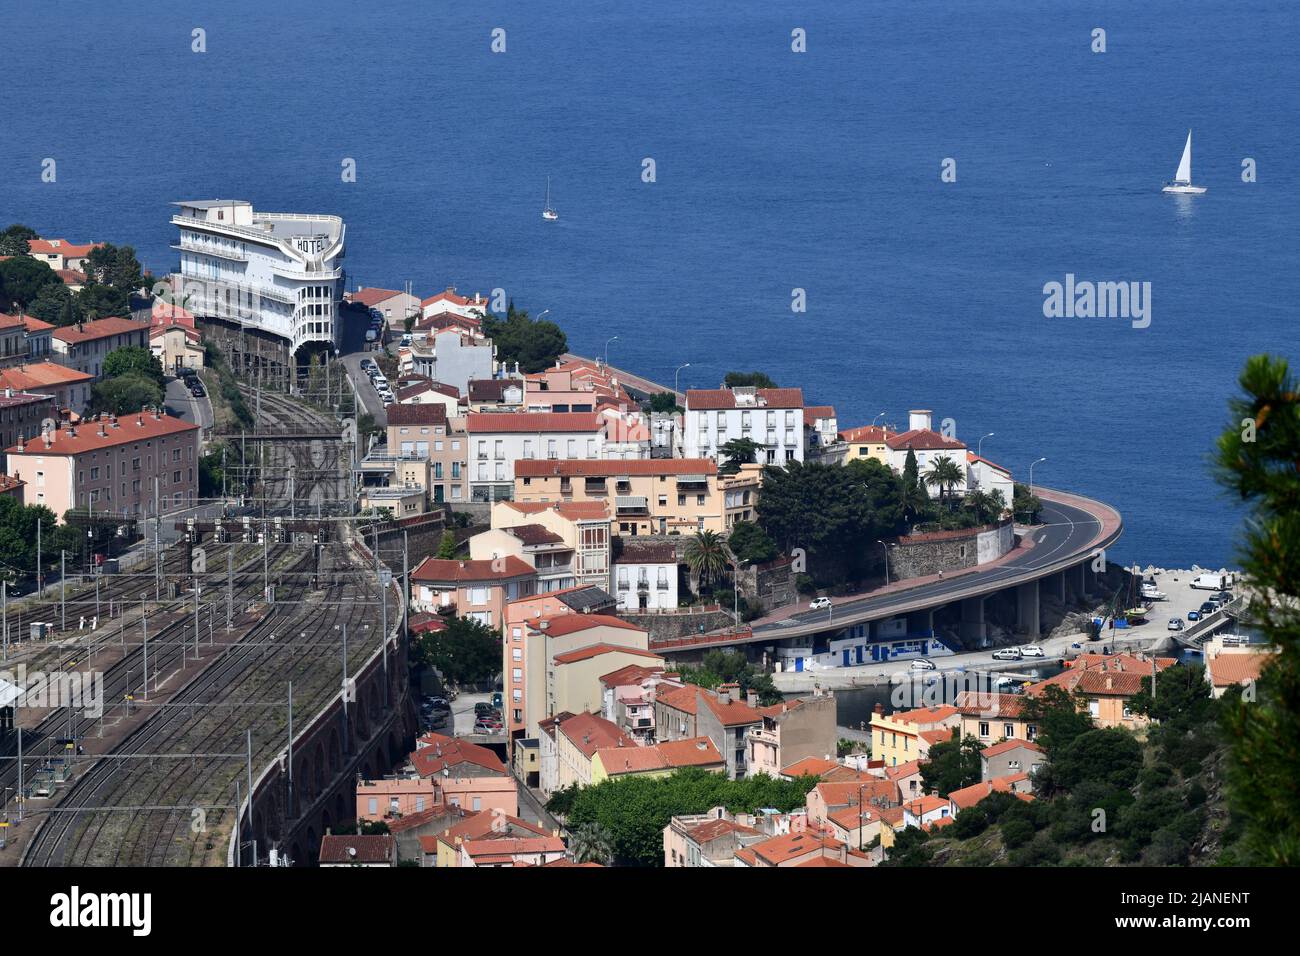 The French border town of Cerbere a railway town in the Pyrénées-Orientales on the broder between France and Spain Stock Photo